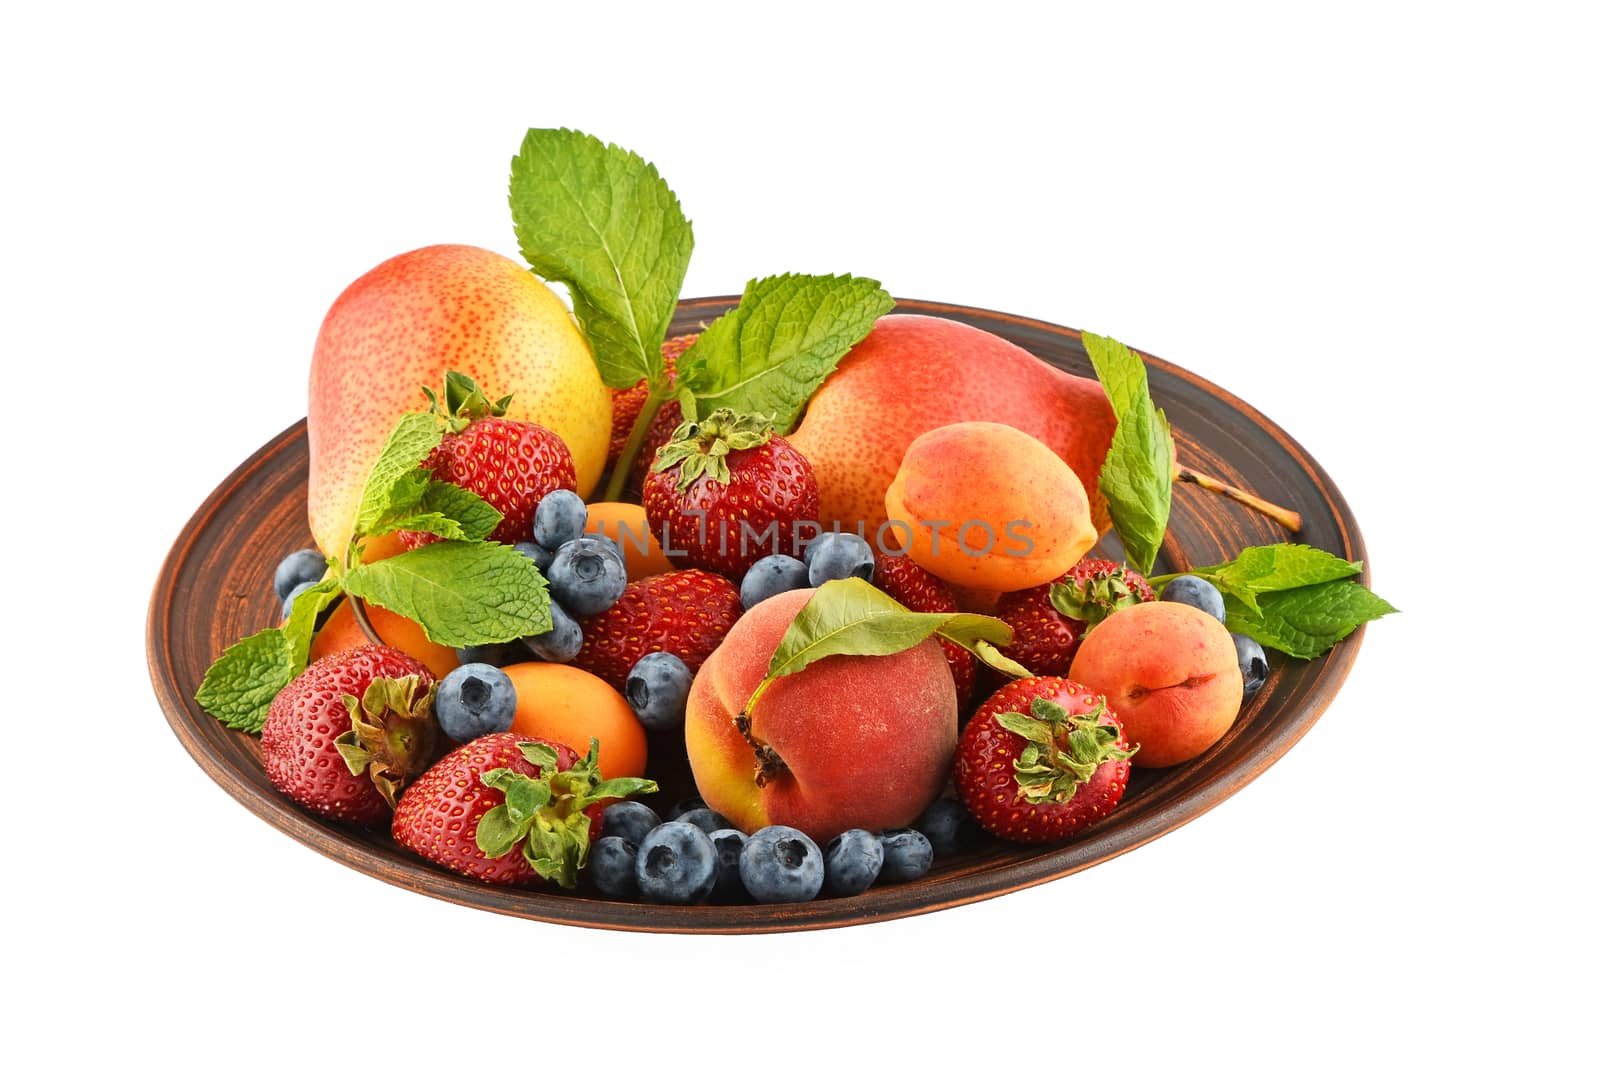 Mellow fresh summer fruits and berries mix with mint leaves in ceramic plate isolated on white, strawberries, blueberries, apricots, peach and pear